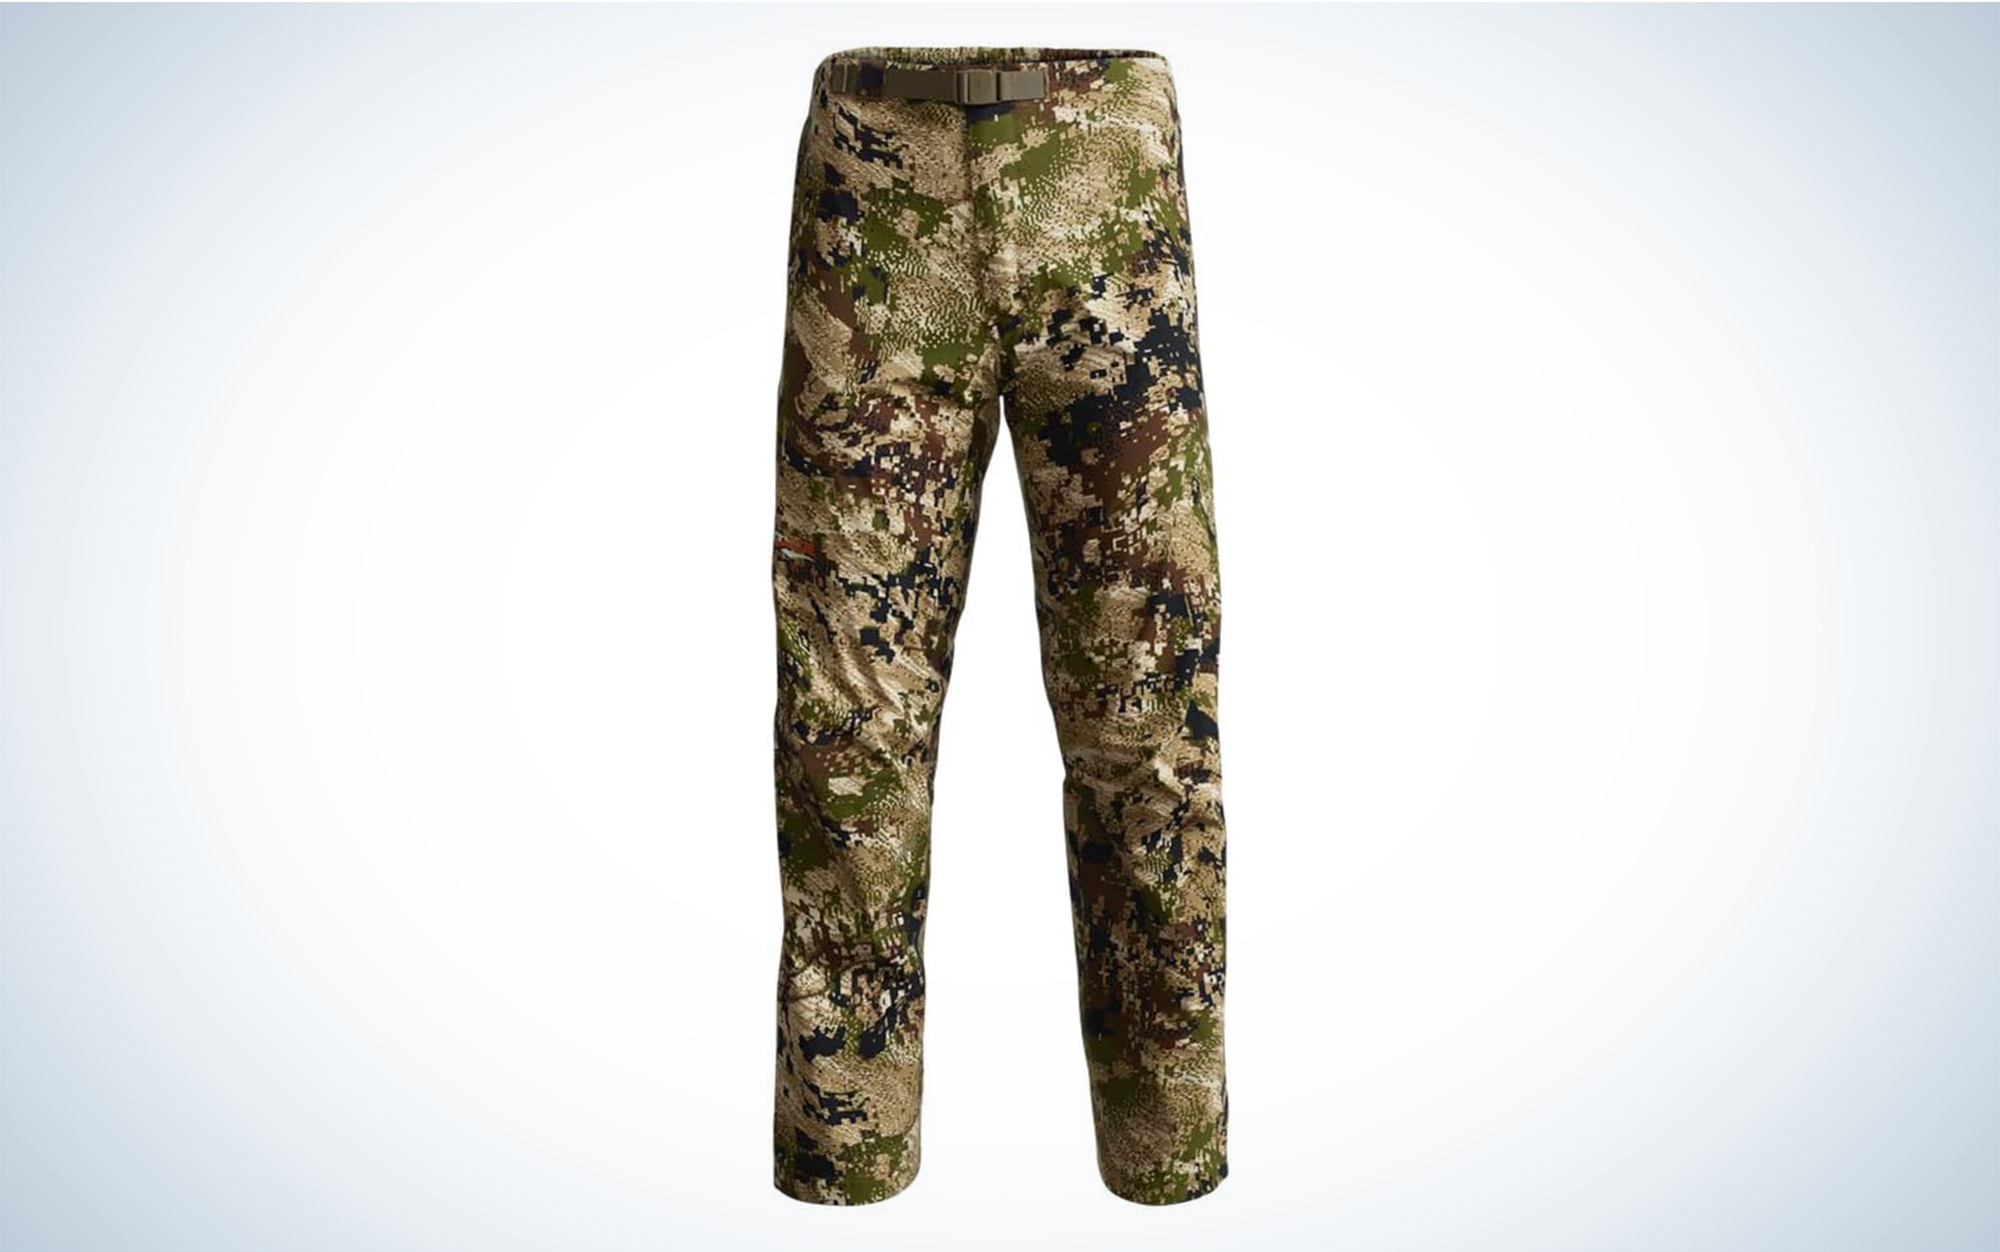 We tested the Sitka Dewpoint Pant.